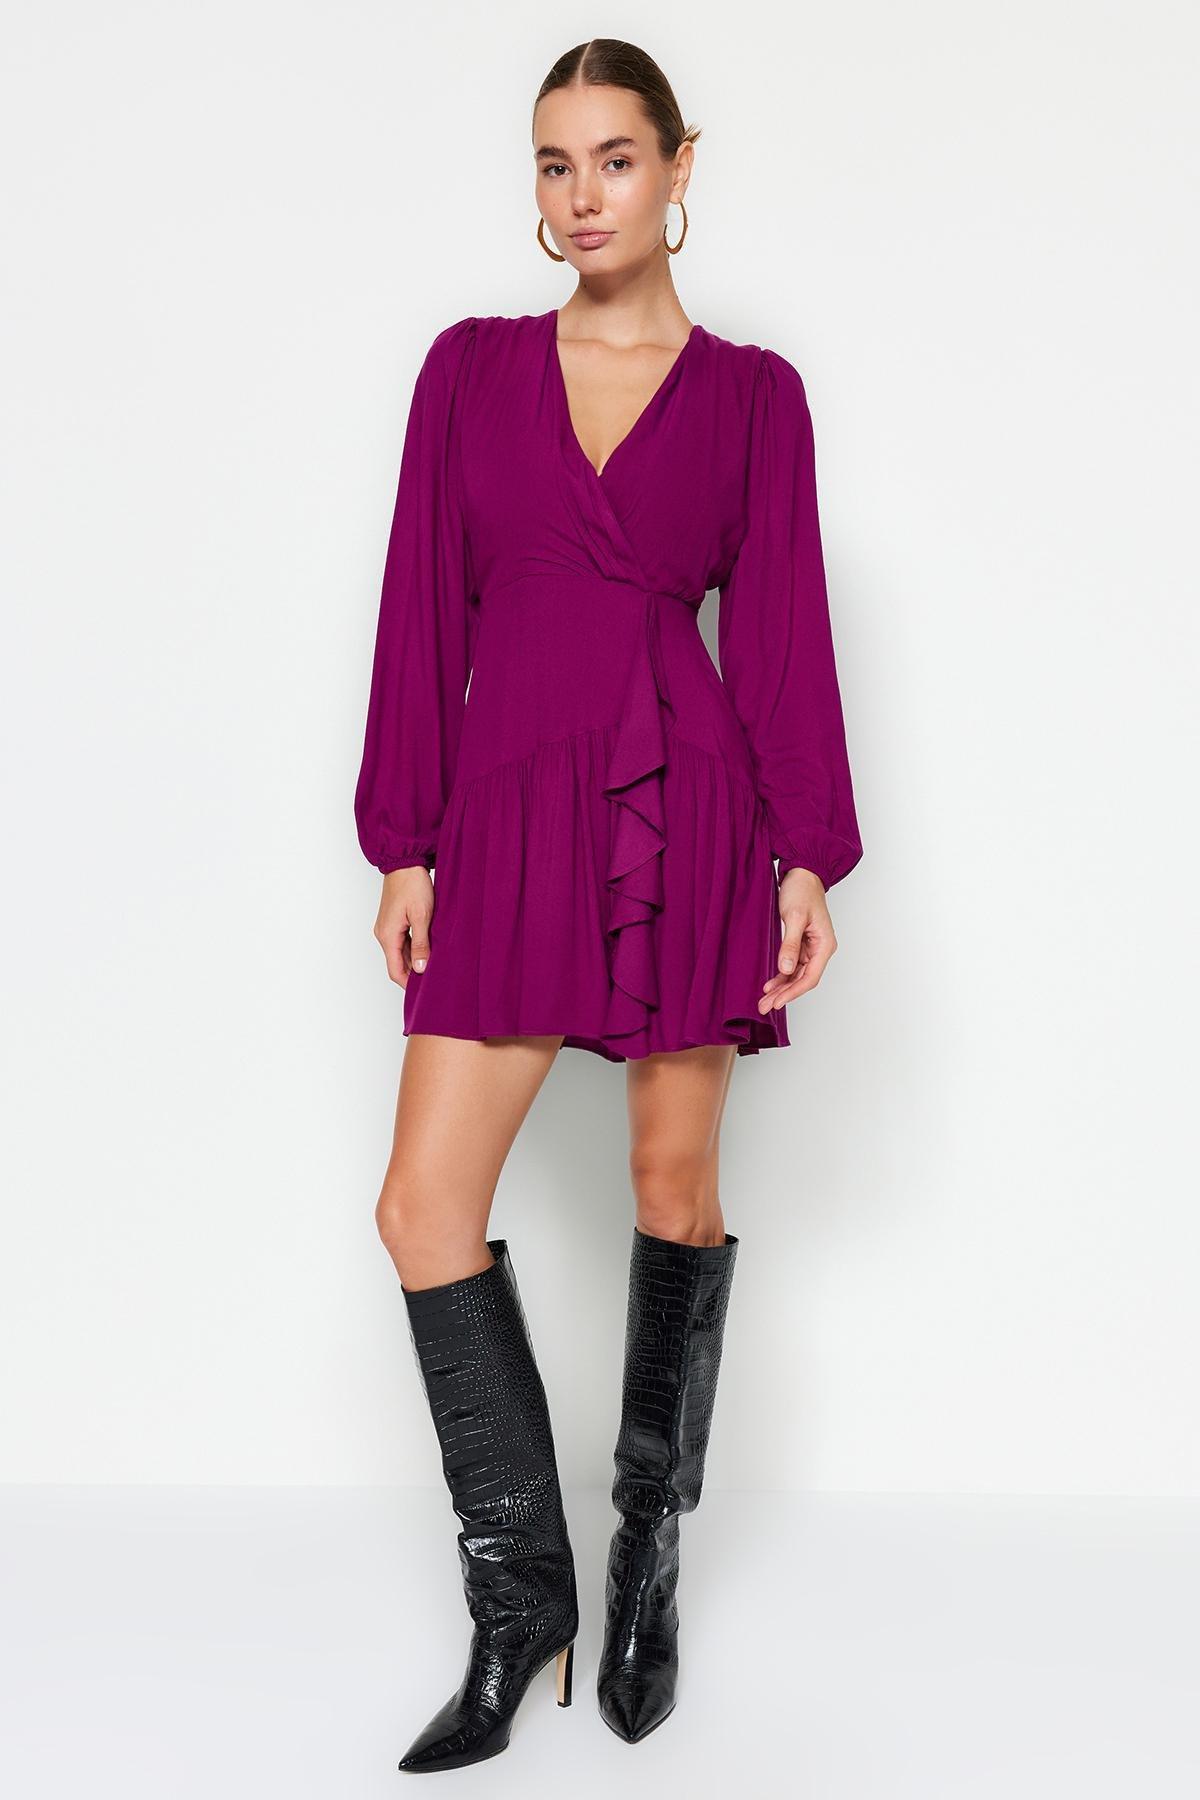 Trendyol - Purple Collared Double Breasted Dress